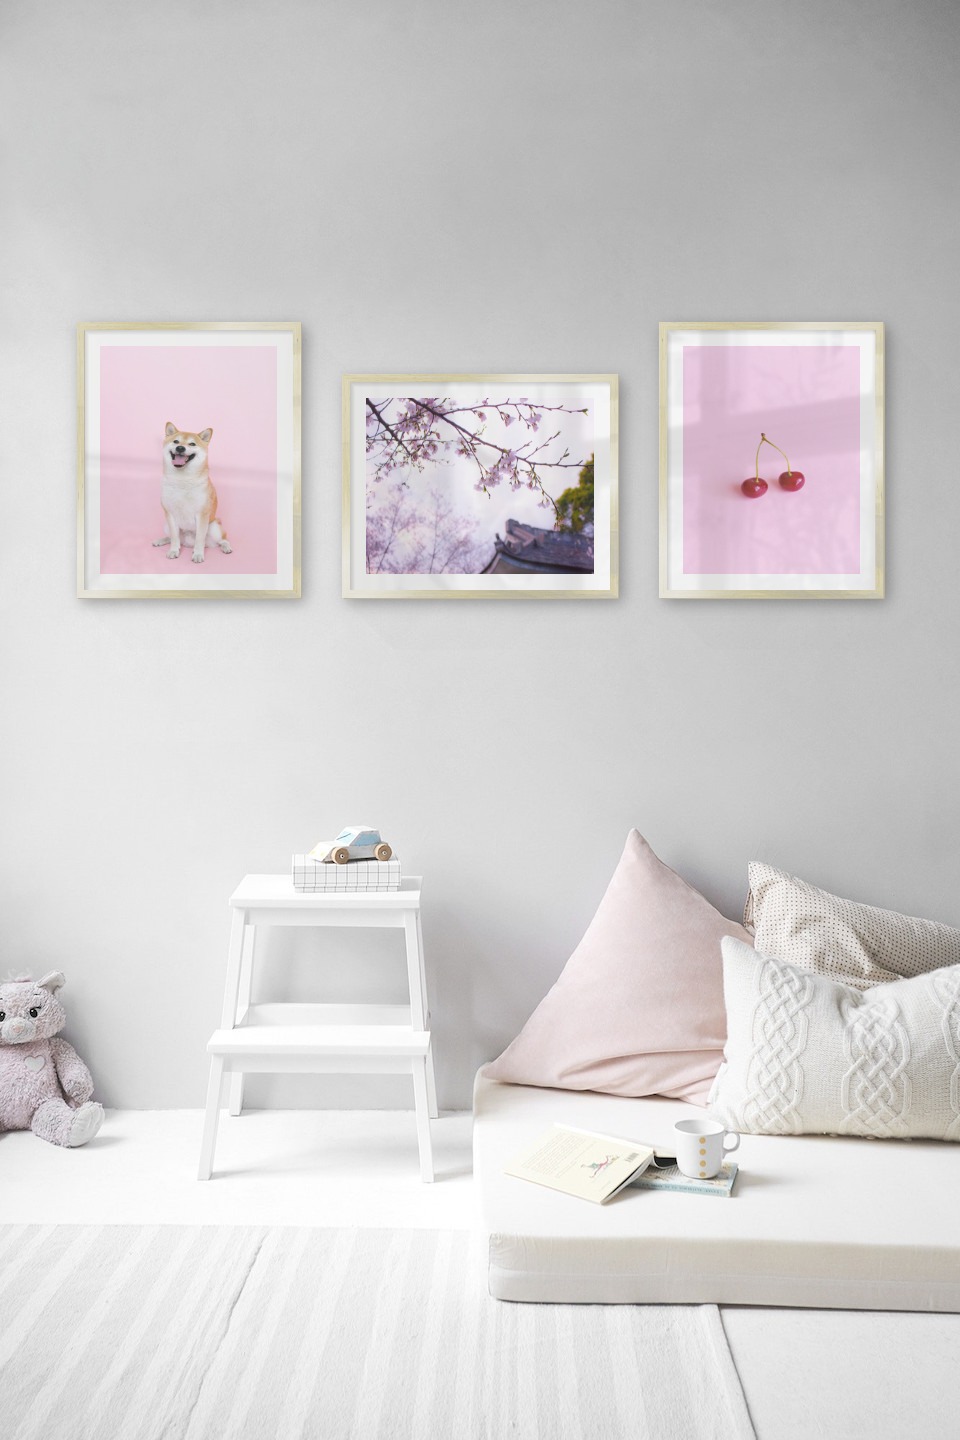 Gallery wall with picture frames in gold in sizes 40x50 with prints "Dog", "Flowers in Tokyo" and "Cherries and pink"